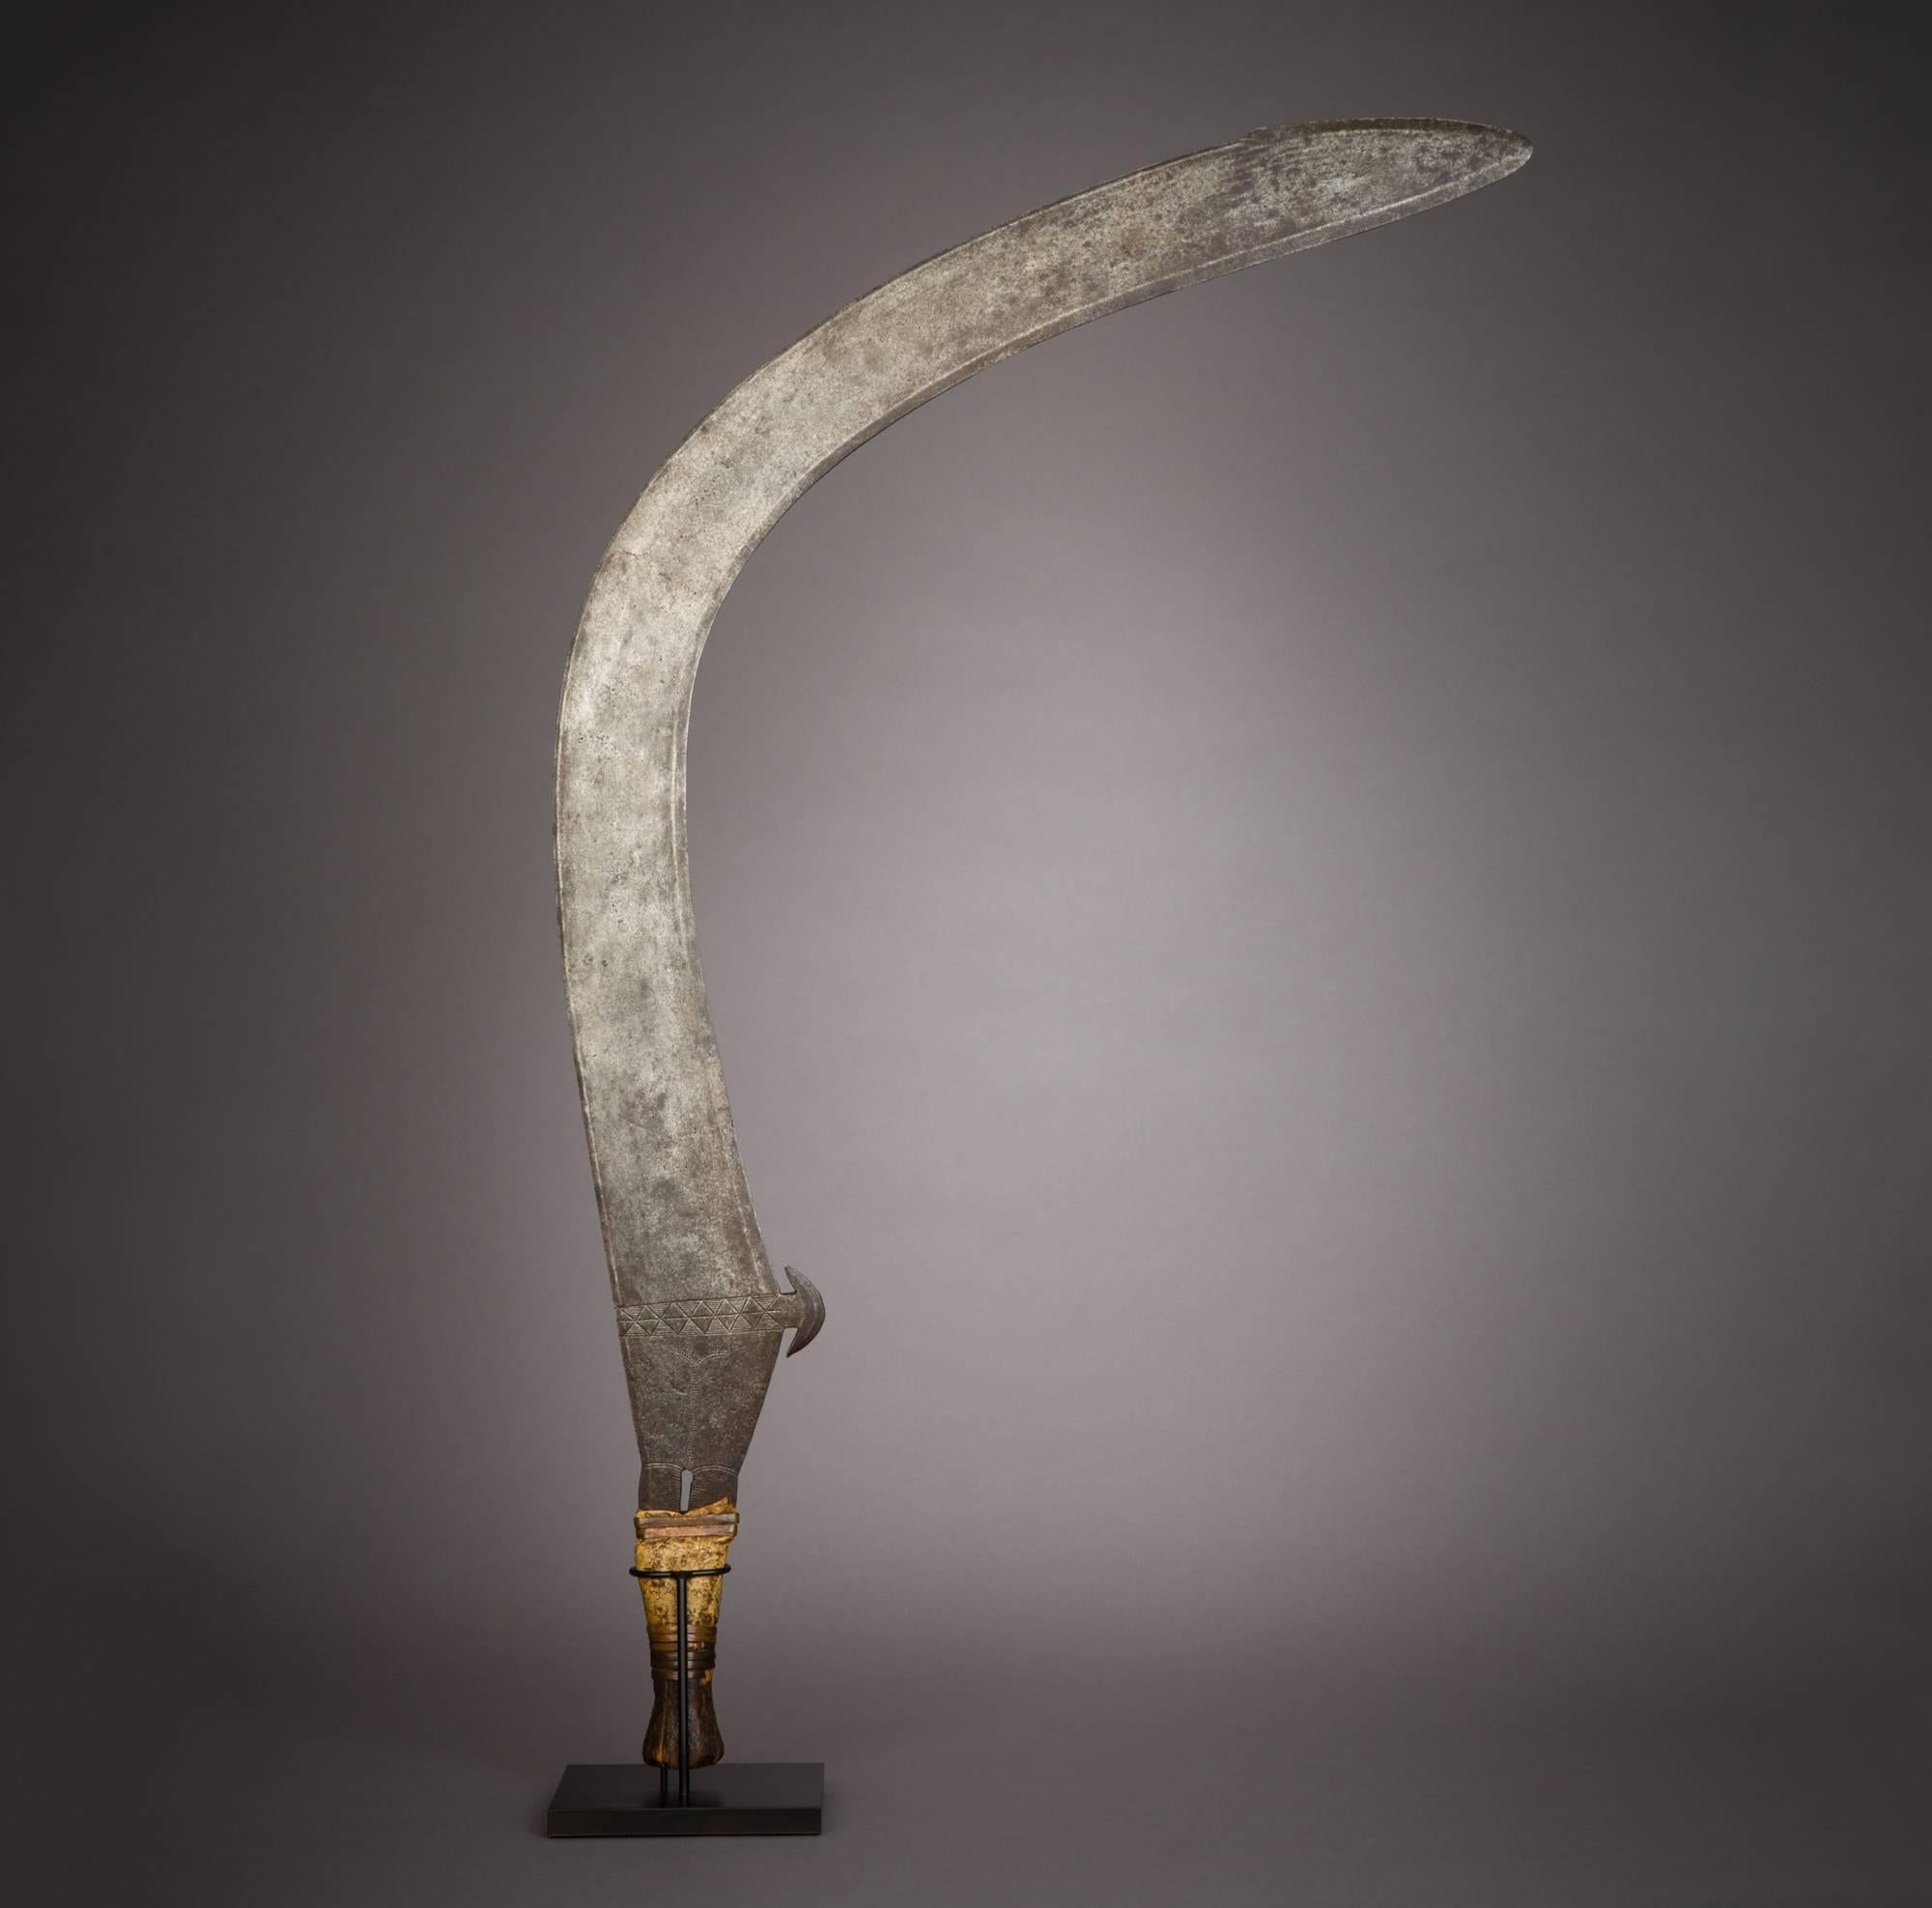 Elegance and painstaking craftsmanship mark this Boa sickle, which stands like an alert snake, poised, rigid yet fluid. The warmth of the handle against the cool steel grey of the blade create a pleasing contrast for the eye, but what compels the